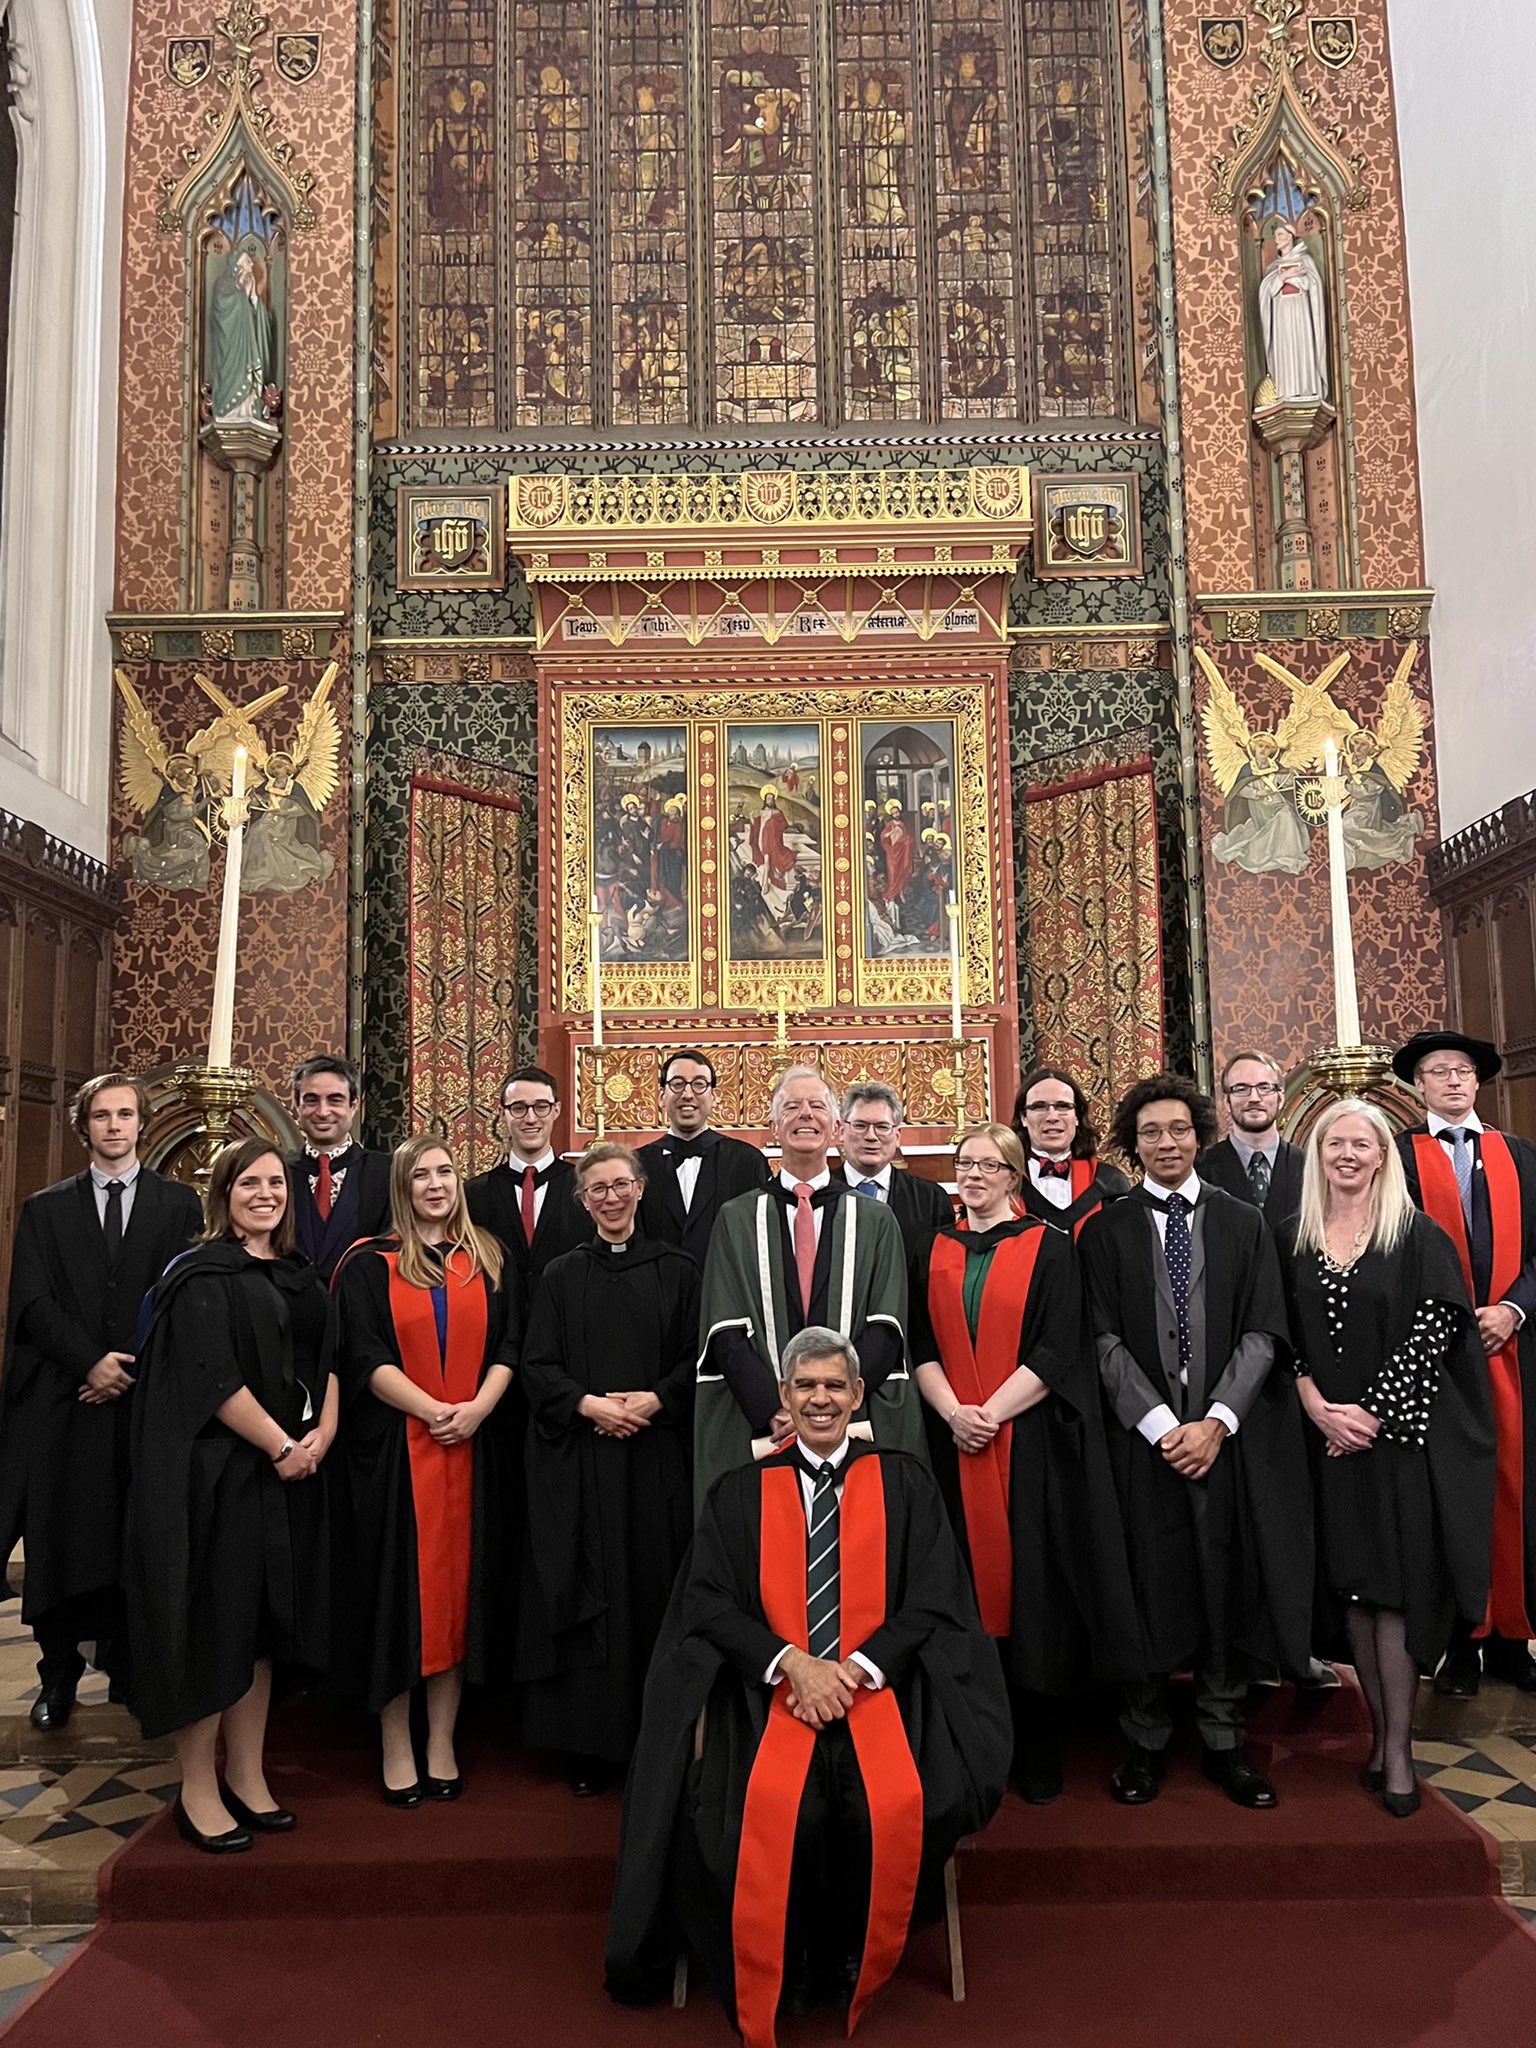 Mohamed A. El-Erian on Twitter: "A very warm welcome to those admitted this  evening to the Fellowship of Queens' College, Cambridge. @QueensCam  @Cambridge_Uni #cambridge @YoursCambridge https://t.co/2o6wylCWfL" / Twitter